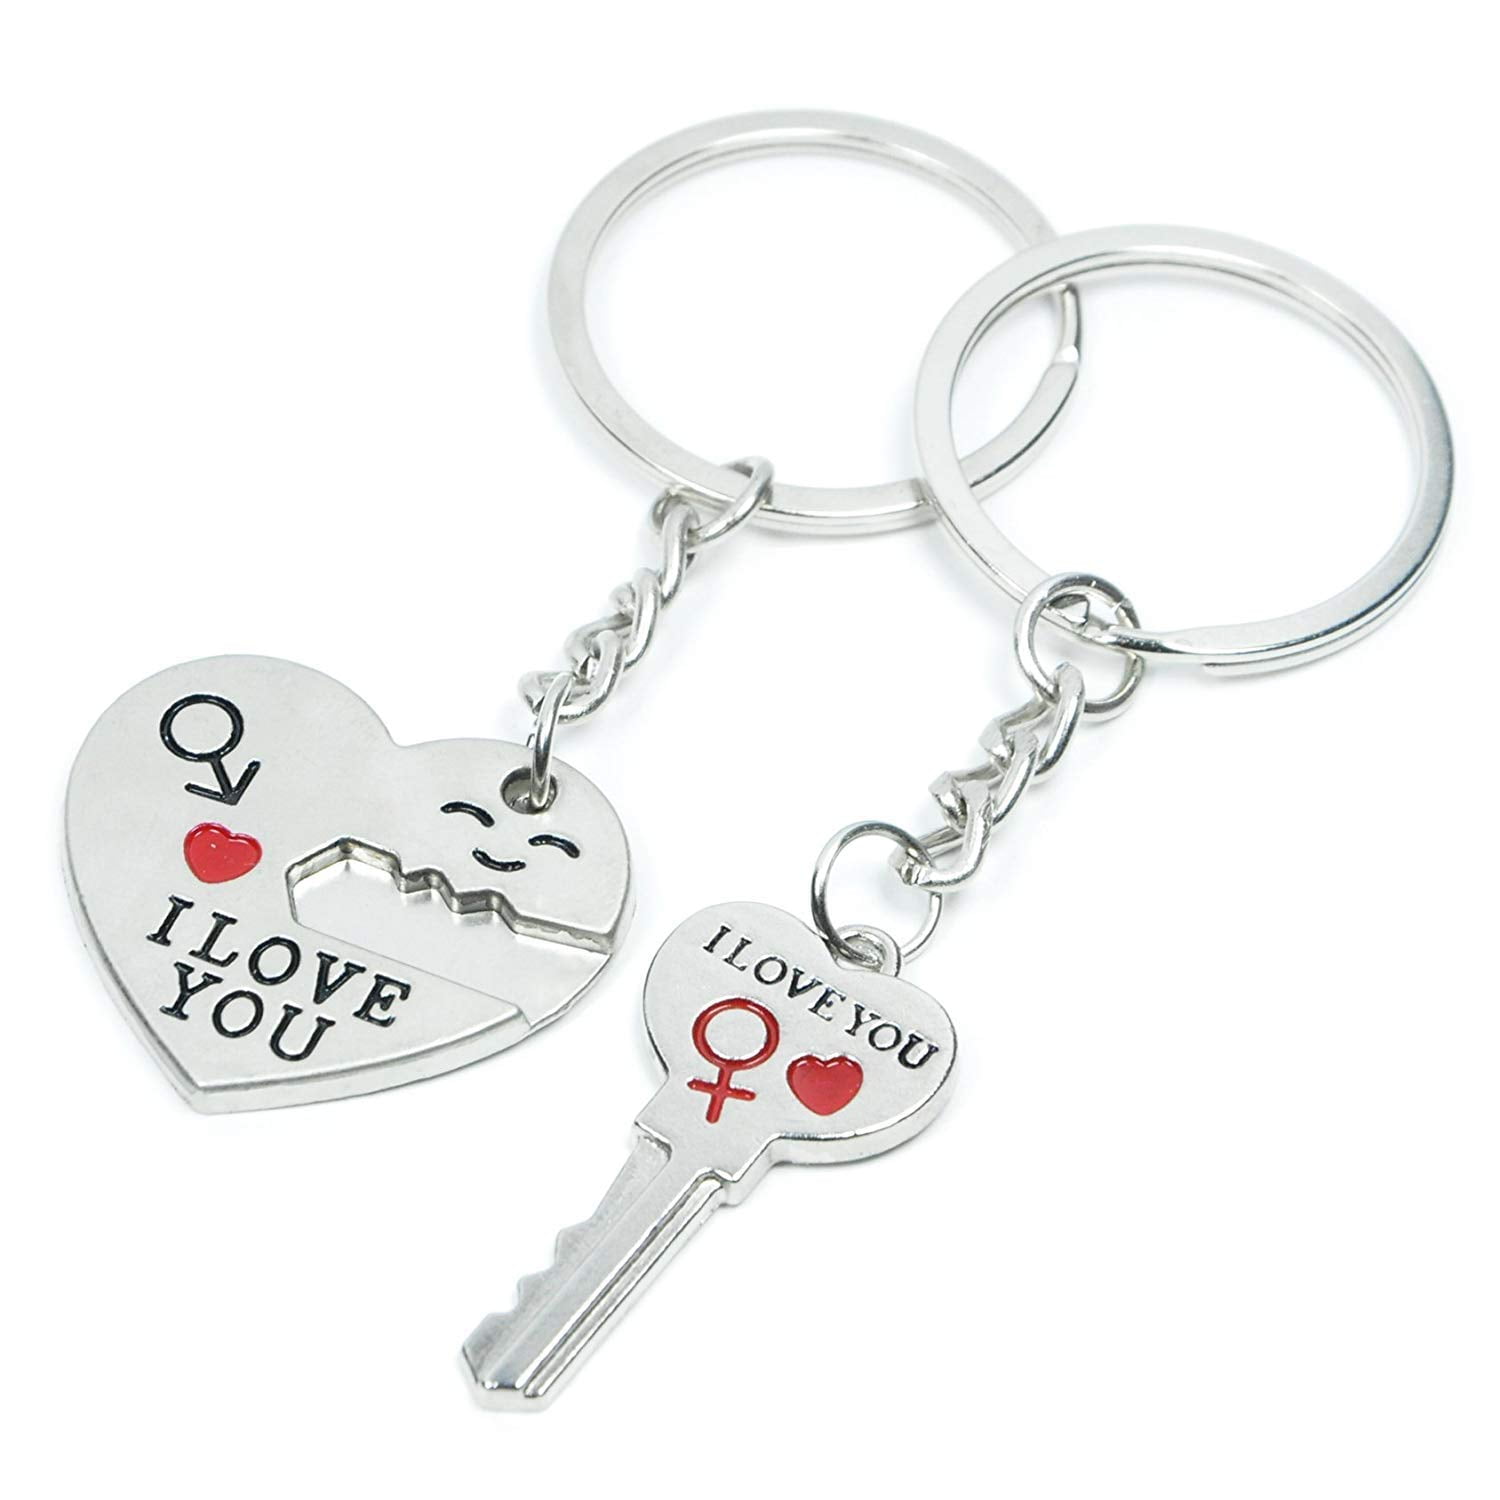 Keychains Couple Pair of Keychains Keyring Keyfob Valentines Day 1 Pair Lover Gift Heart Key Jewelry Accessory Keychain Gift for Xmas Accessories